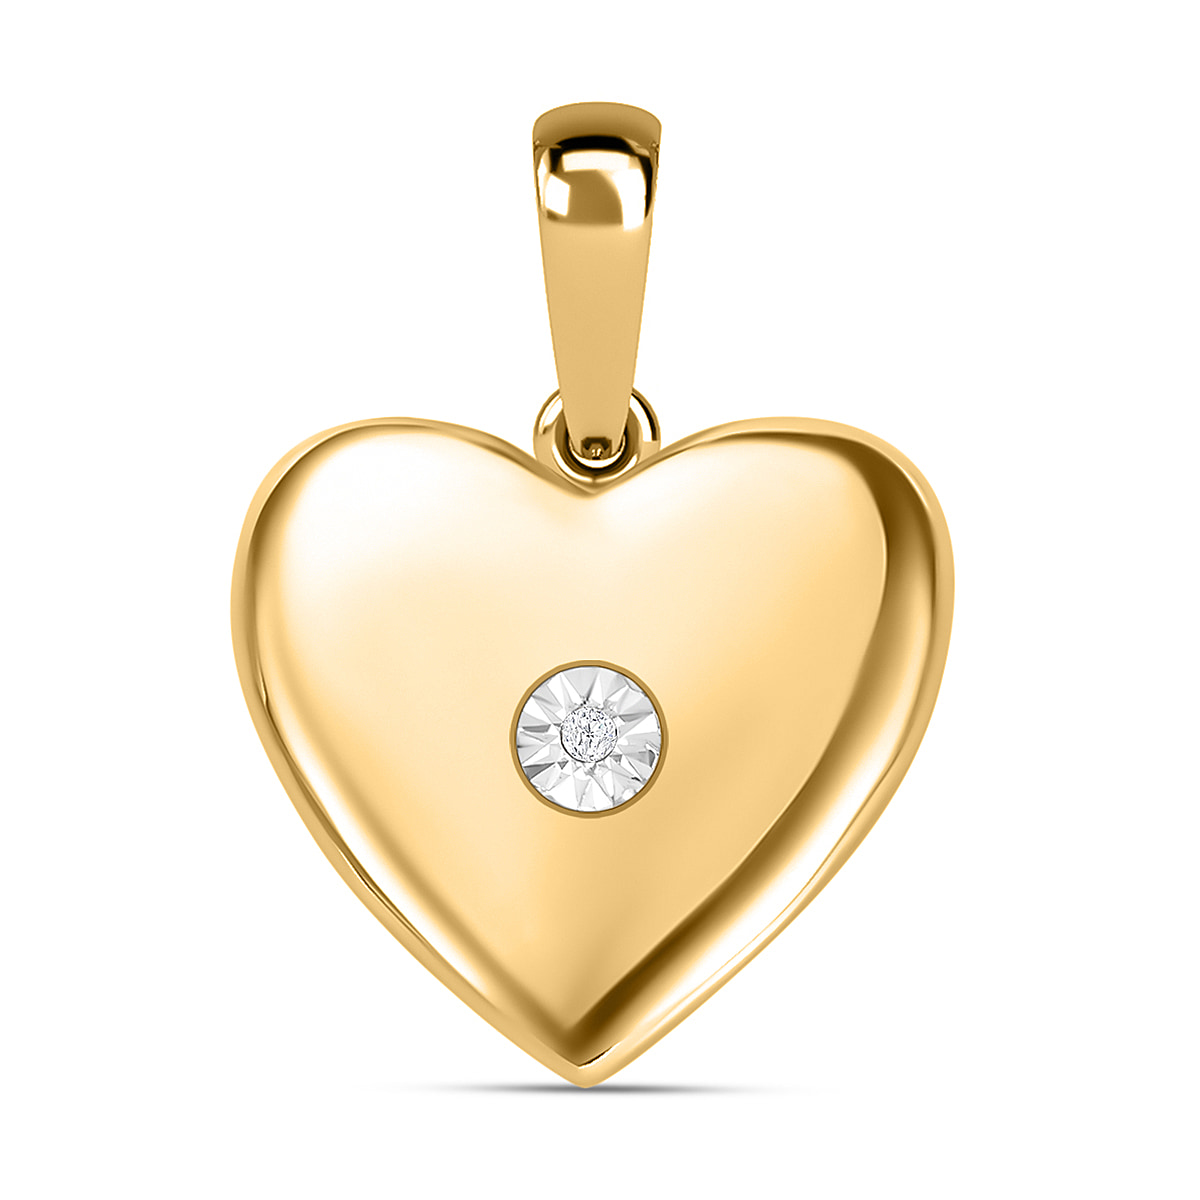 Diamond Heart Pendant in 18K Yellow Gold Vermeil Plated Sterling Silver